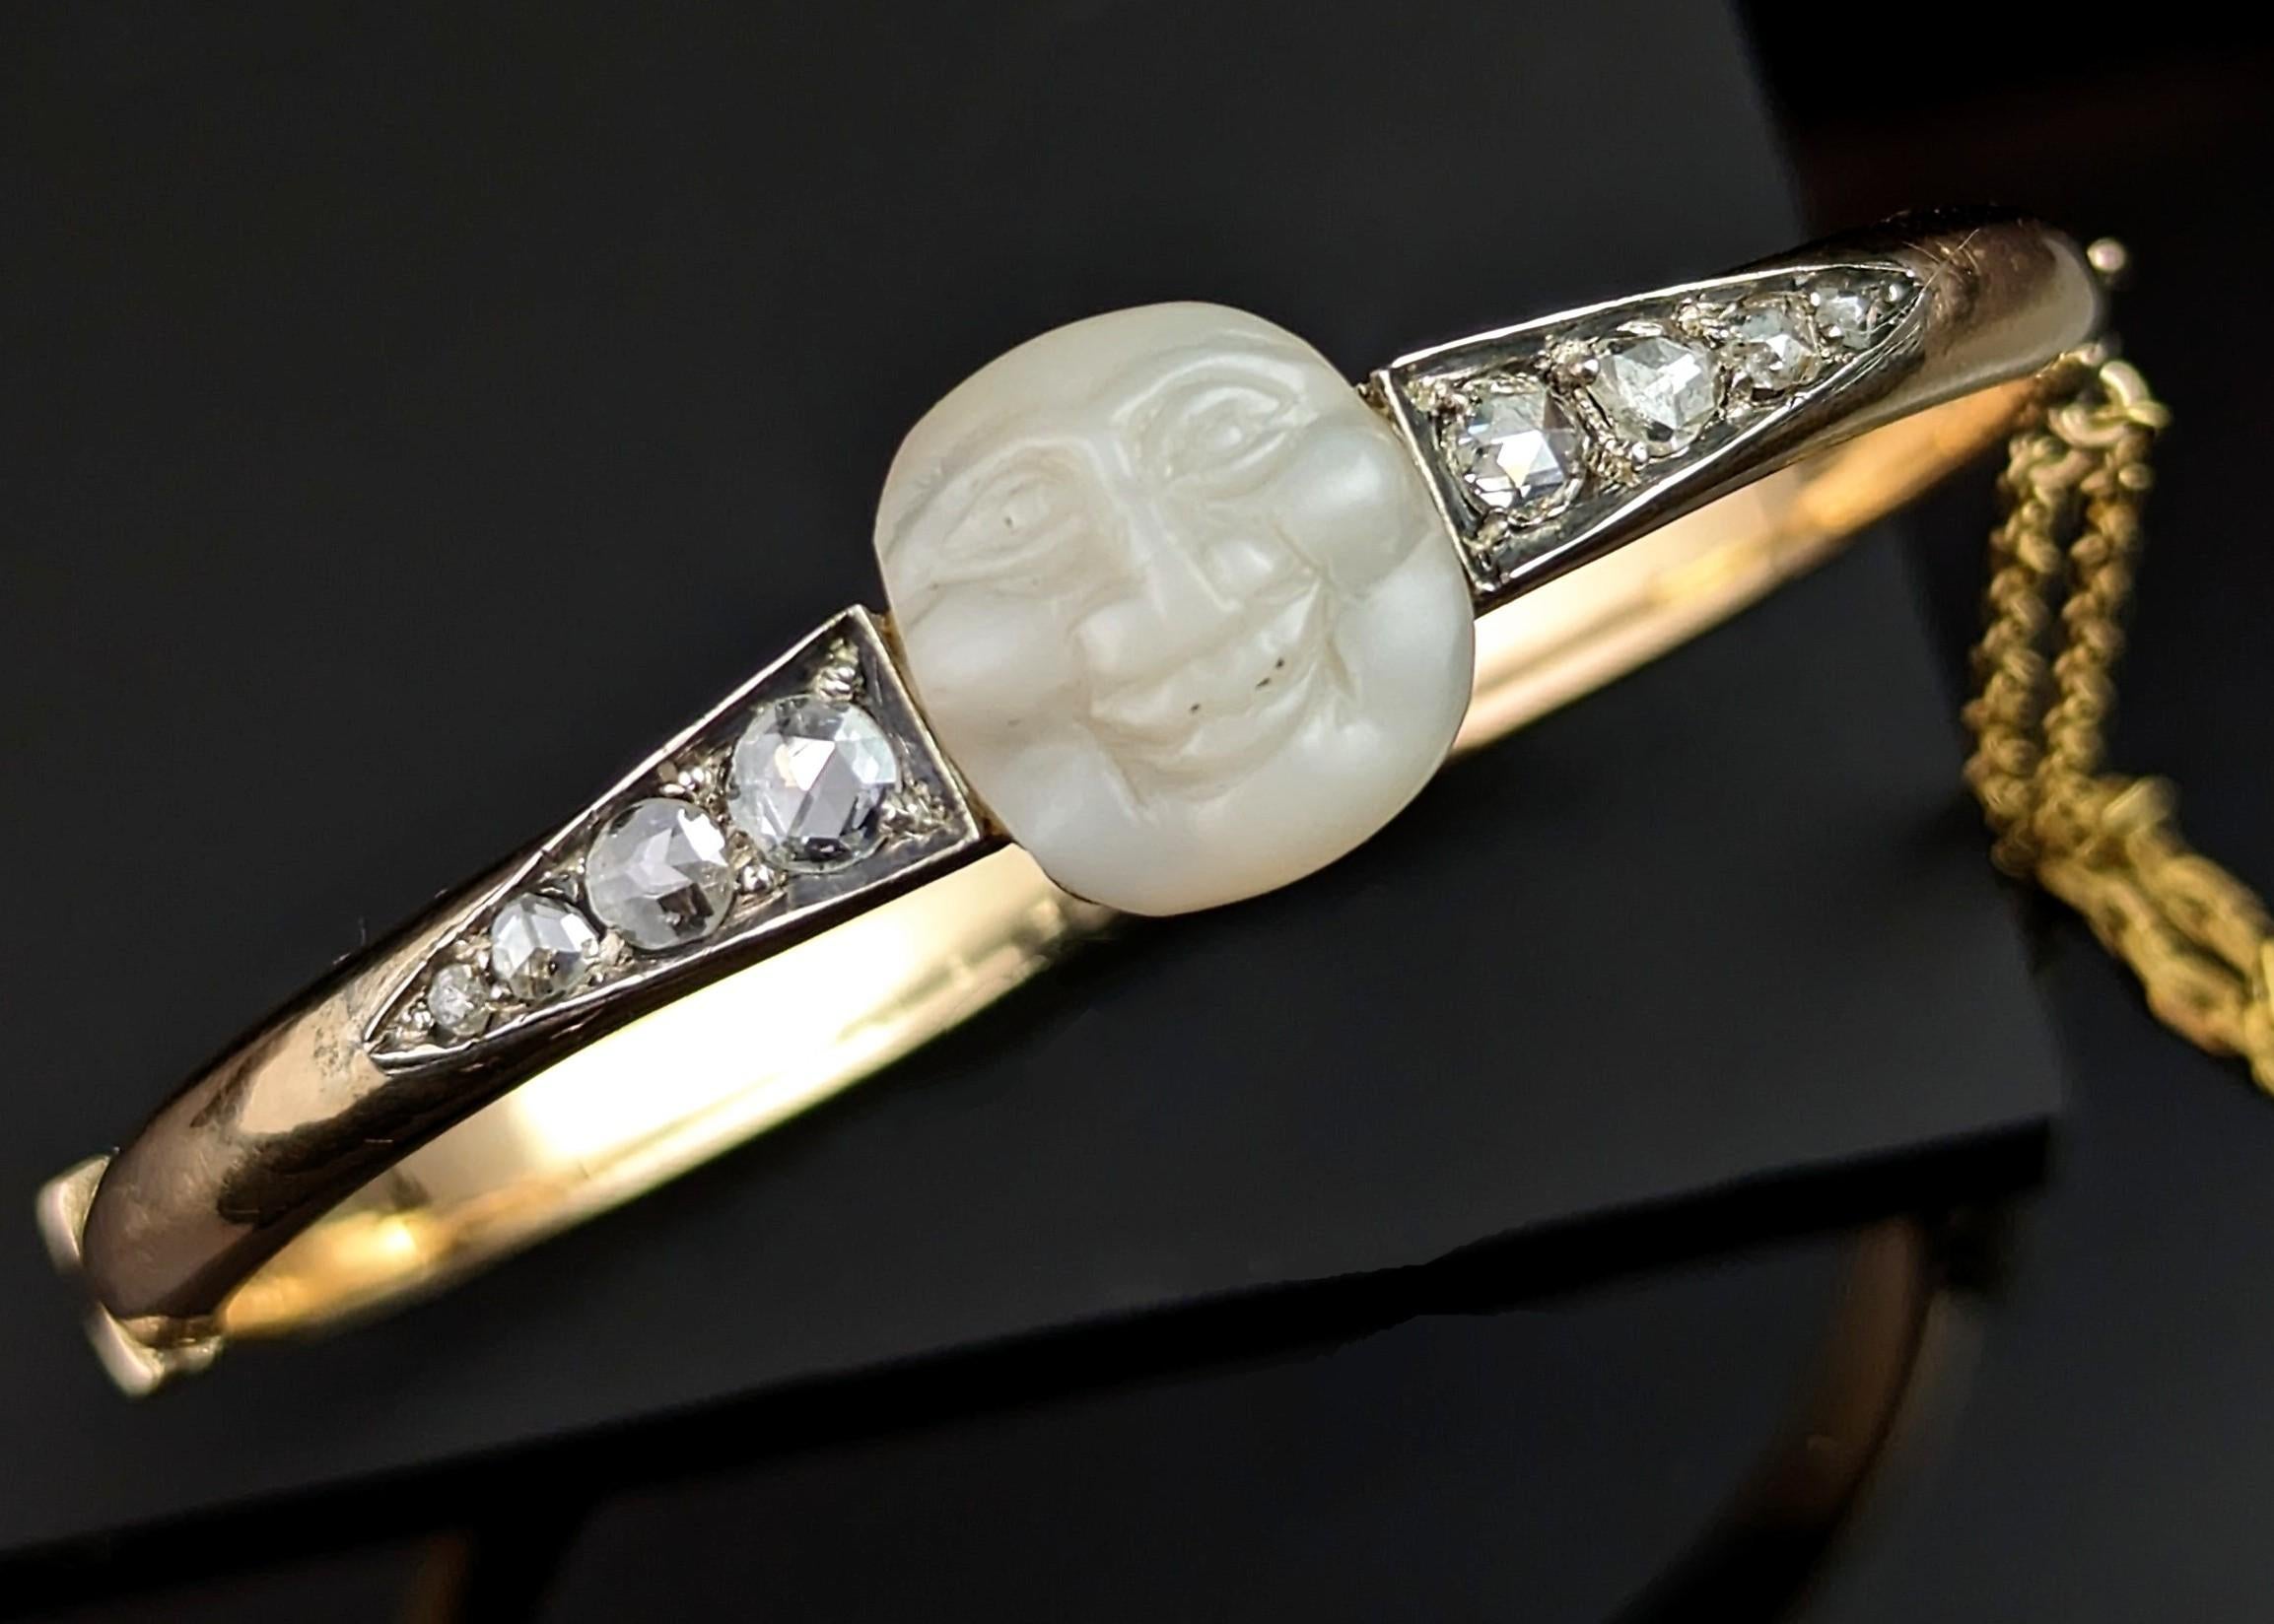 You cannot help but fall in love with this amazing piece! A very rare antique, Victorian era 'man in the moon' and diamond bangle.

Man in the moon jewellery was popular in the Victorian era and was most often seen in smaller pieces, rings, pendants